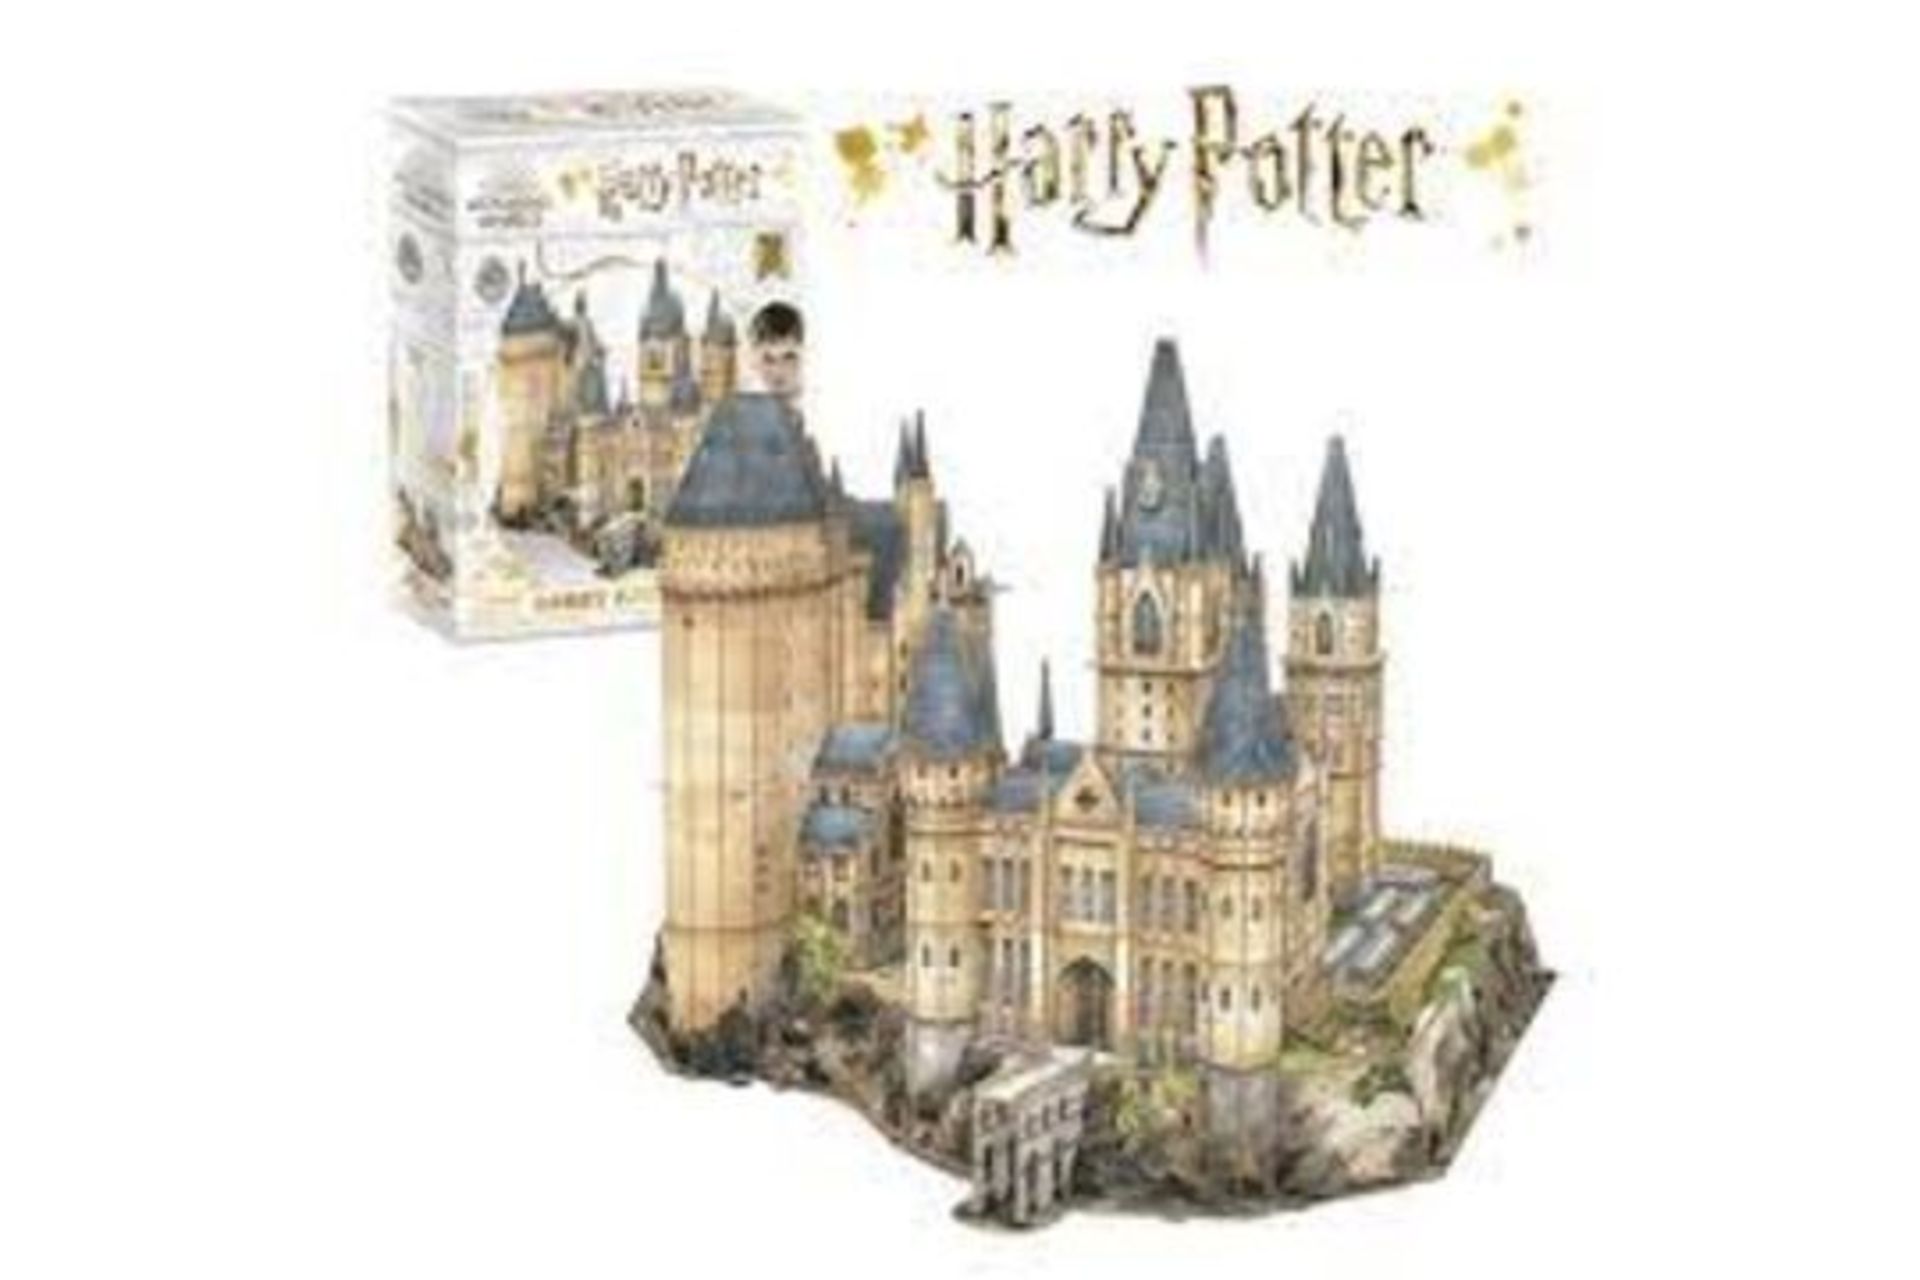 4 X BRAND NEW HARRY POTTER WIZARDING WORLD HOGWARTS ASTRONOMY TOWER 3D PUZZLES RRP £70 EACH R19